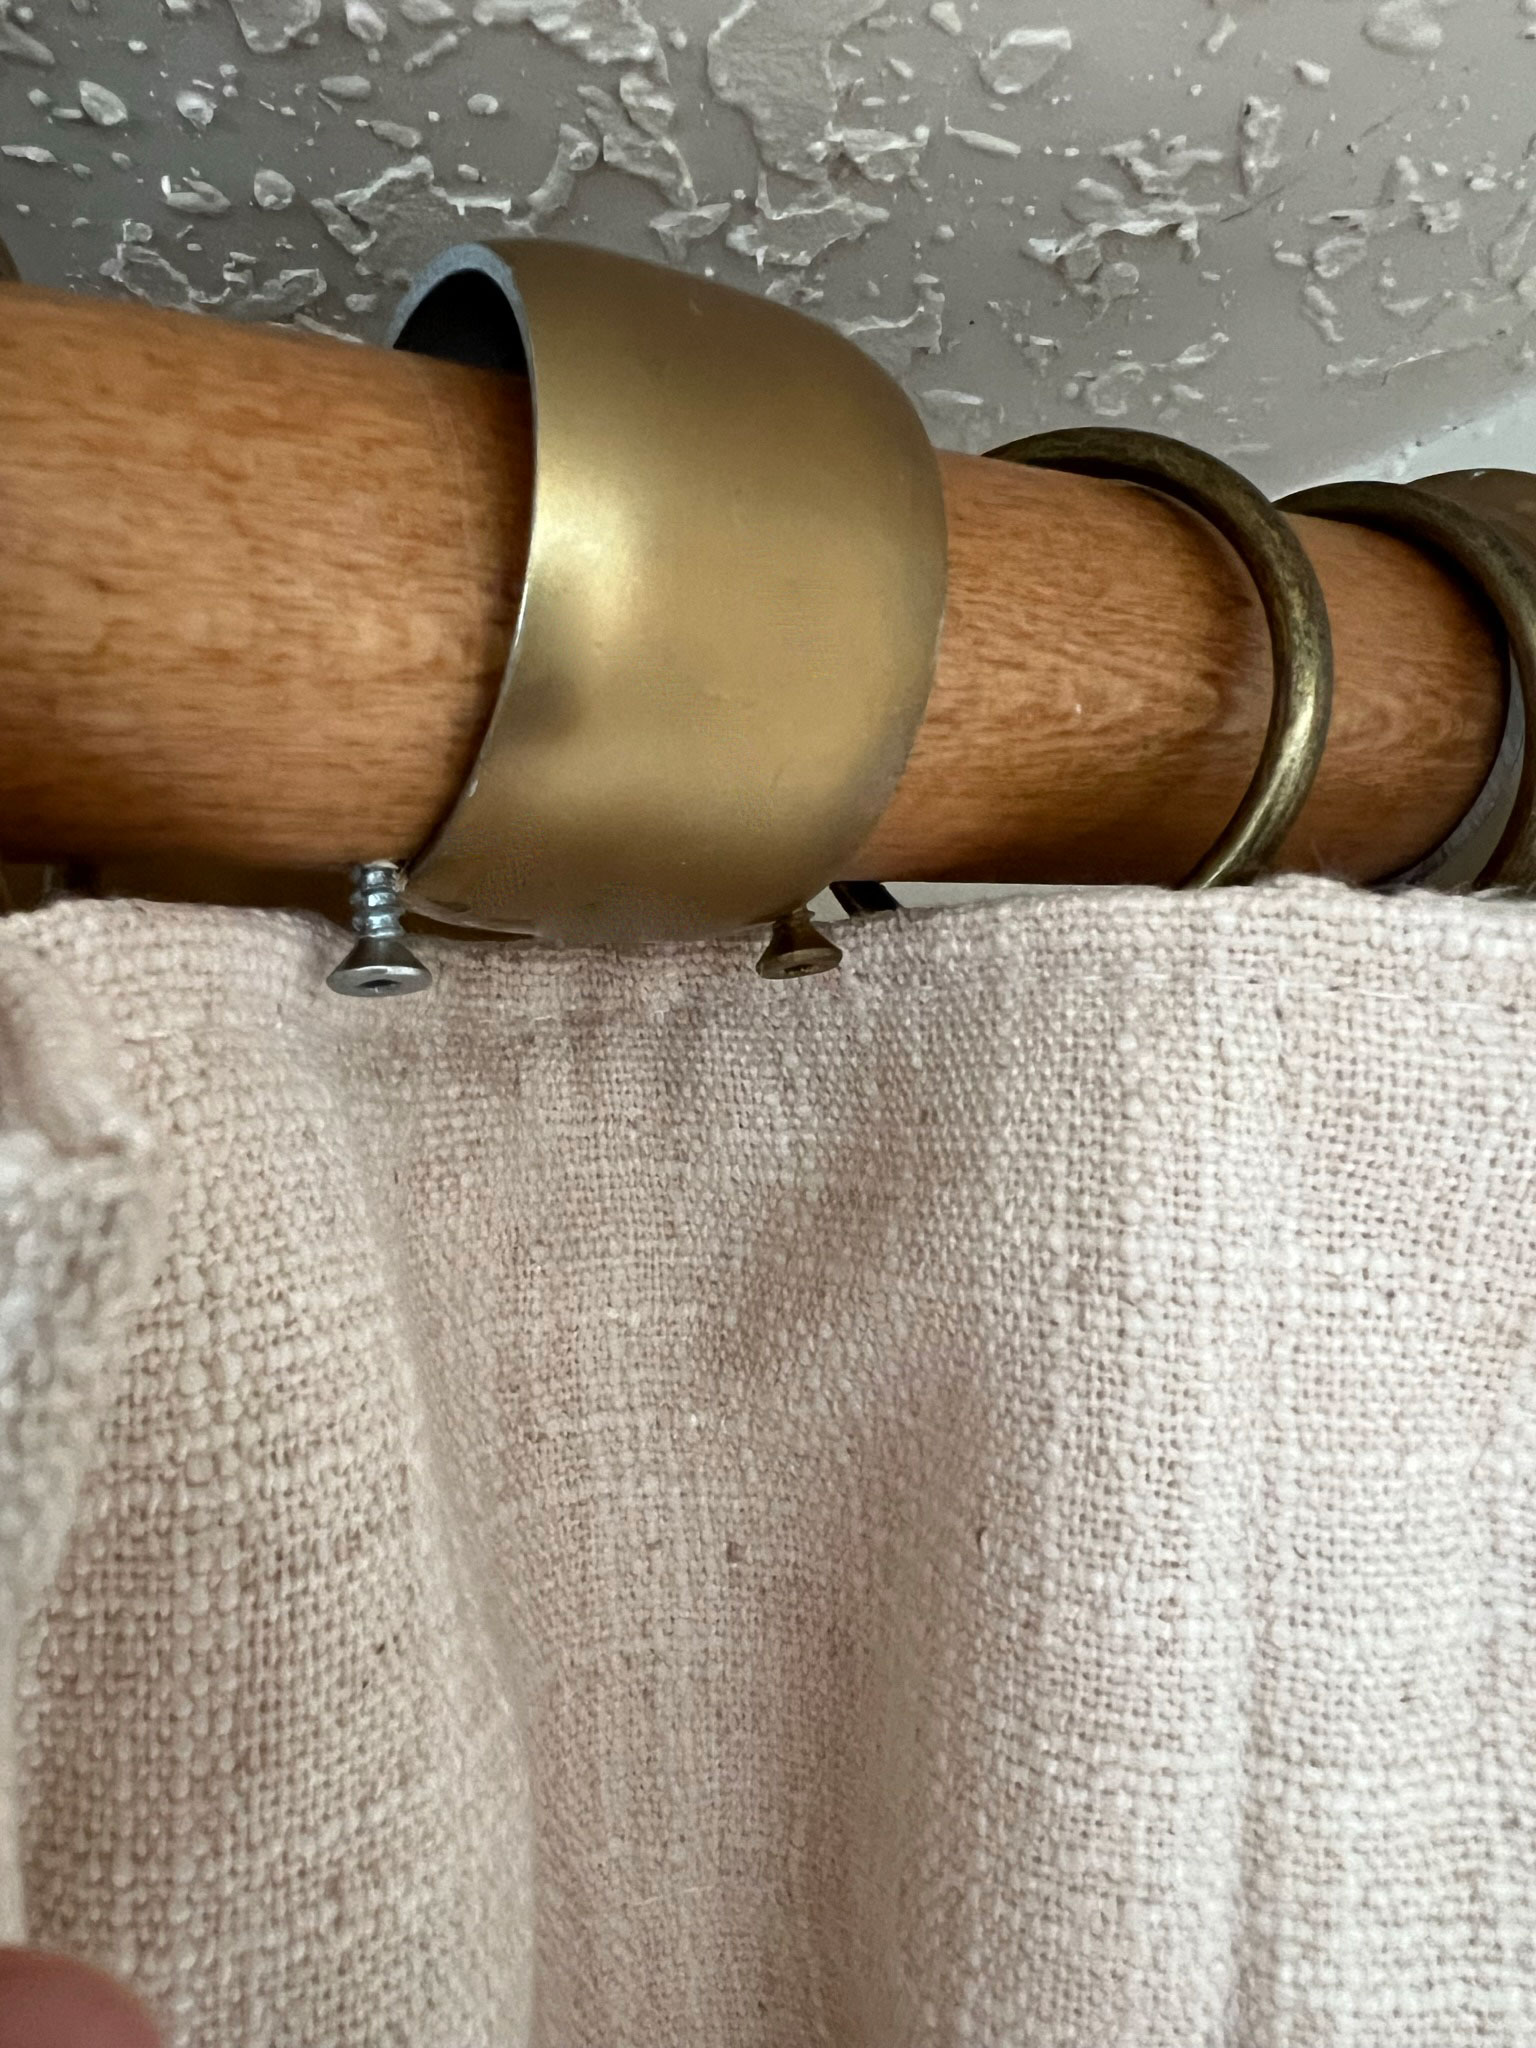 Curtain rod with screws in either side of bracket